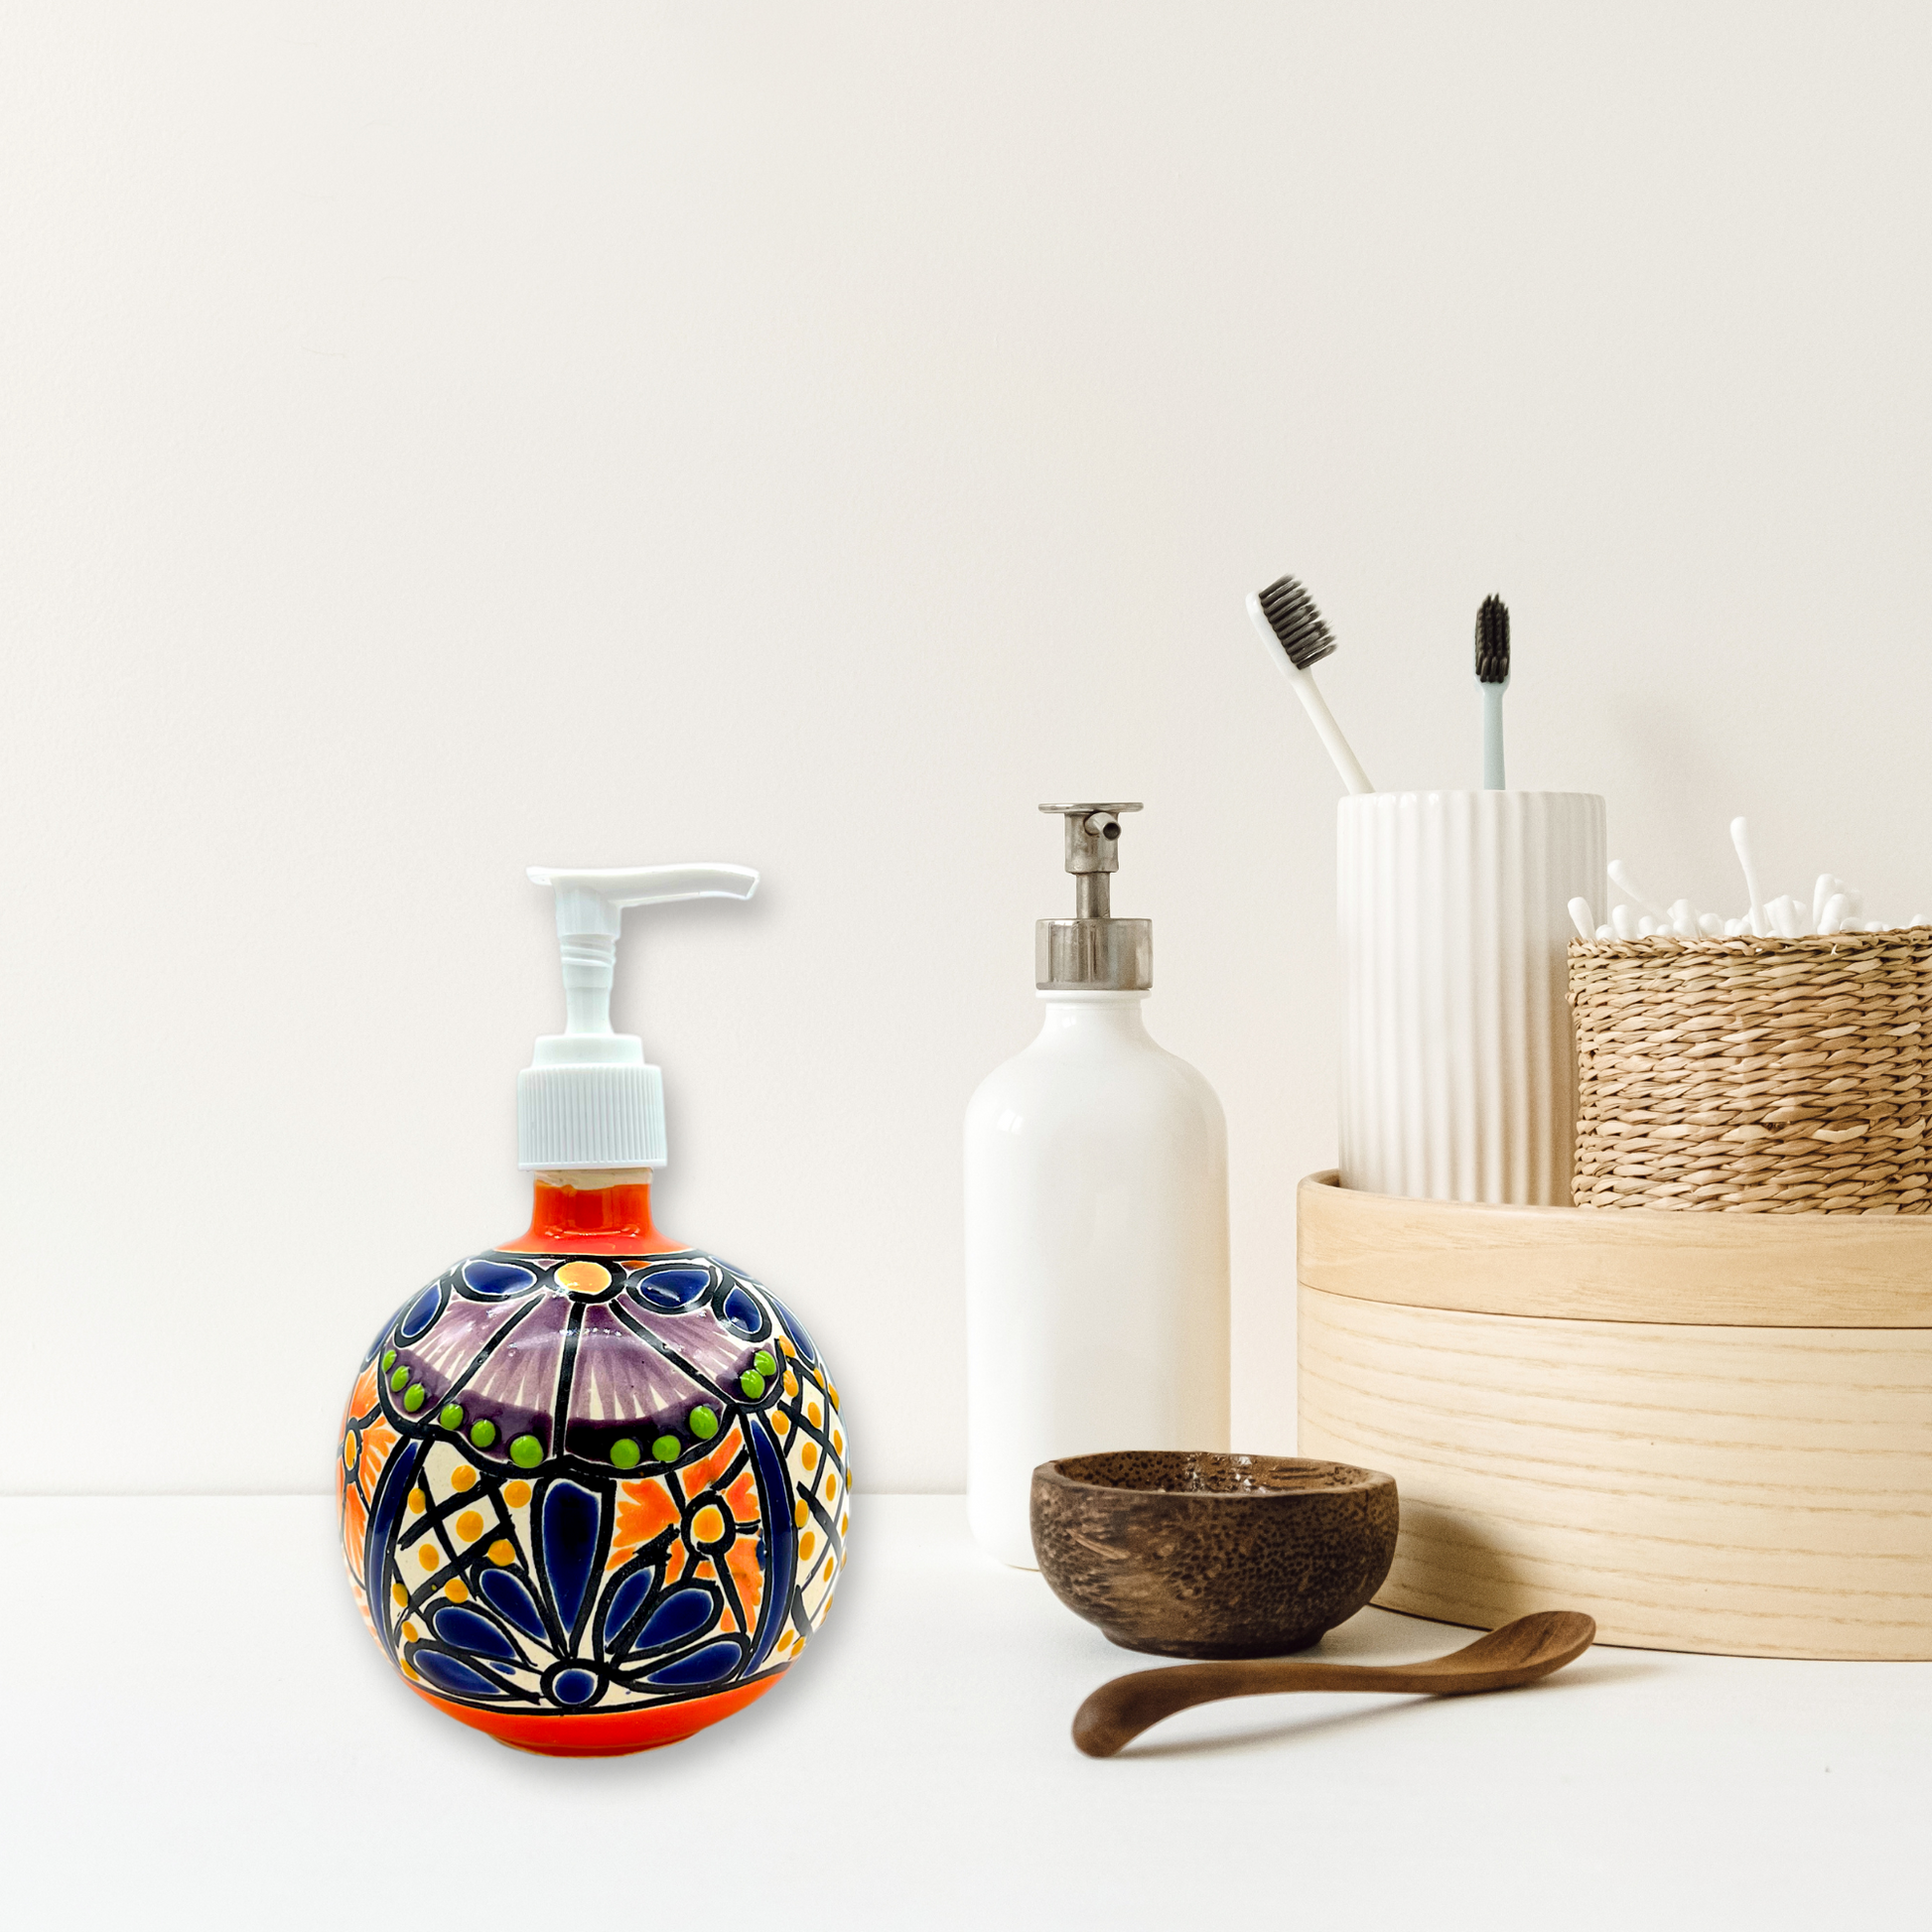 decorative item Hand-painted Talavera Ceramic Soap Dispenser in vibrant colors, an artistic addition to kitchen or bathroom.